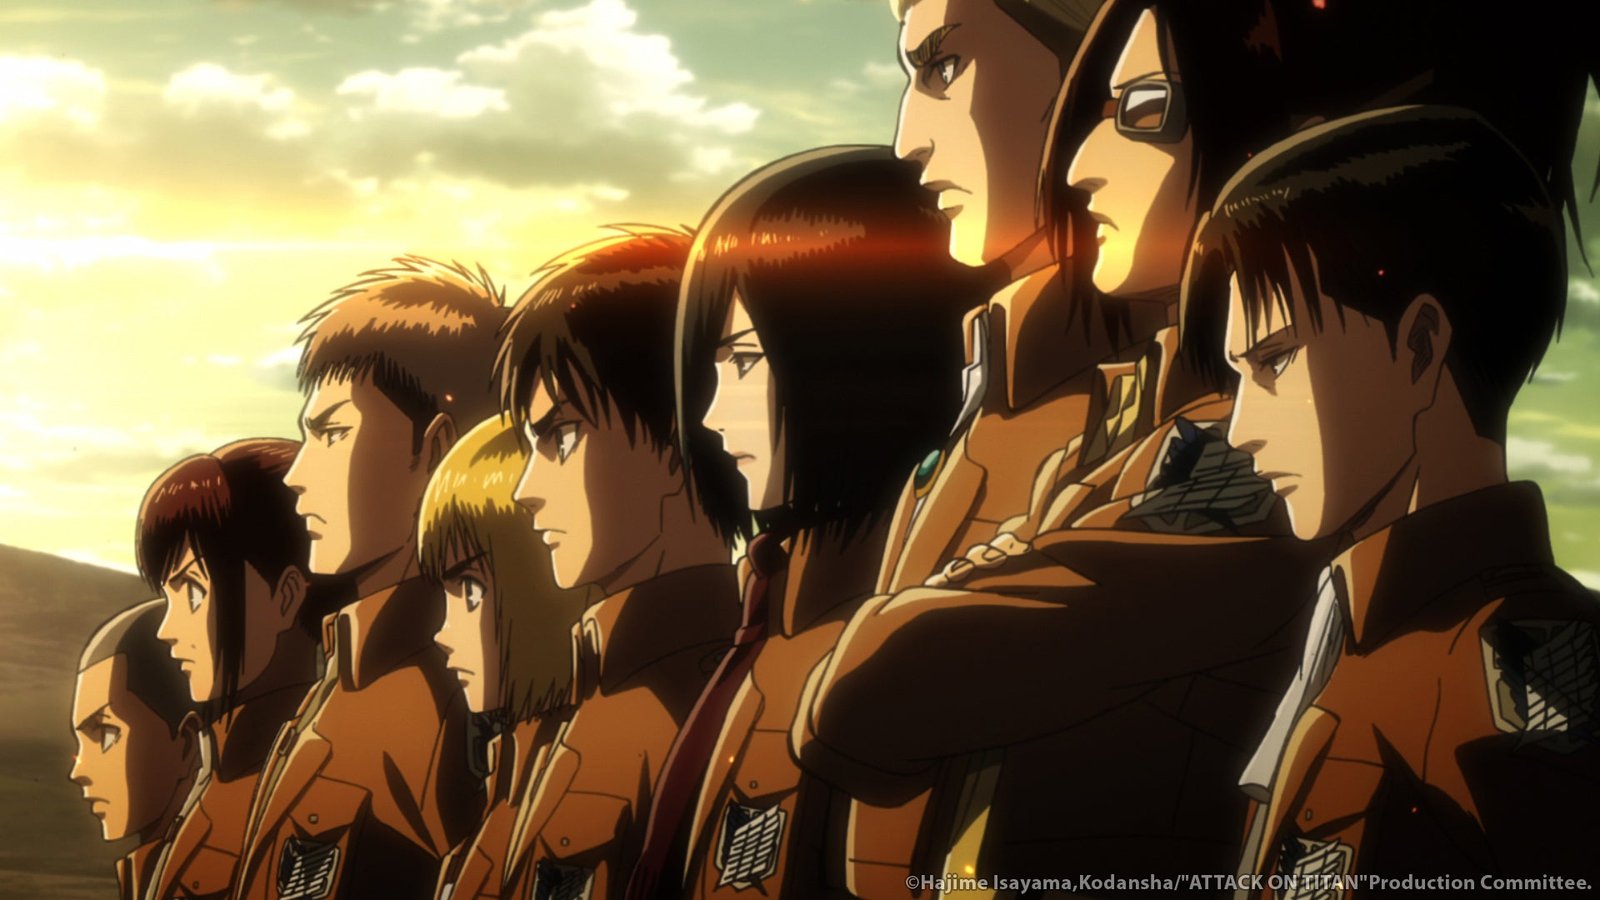 15 Characters Who Died in Attack on Titan: Ranked by Saddest Death